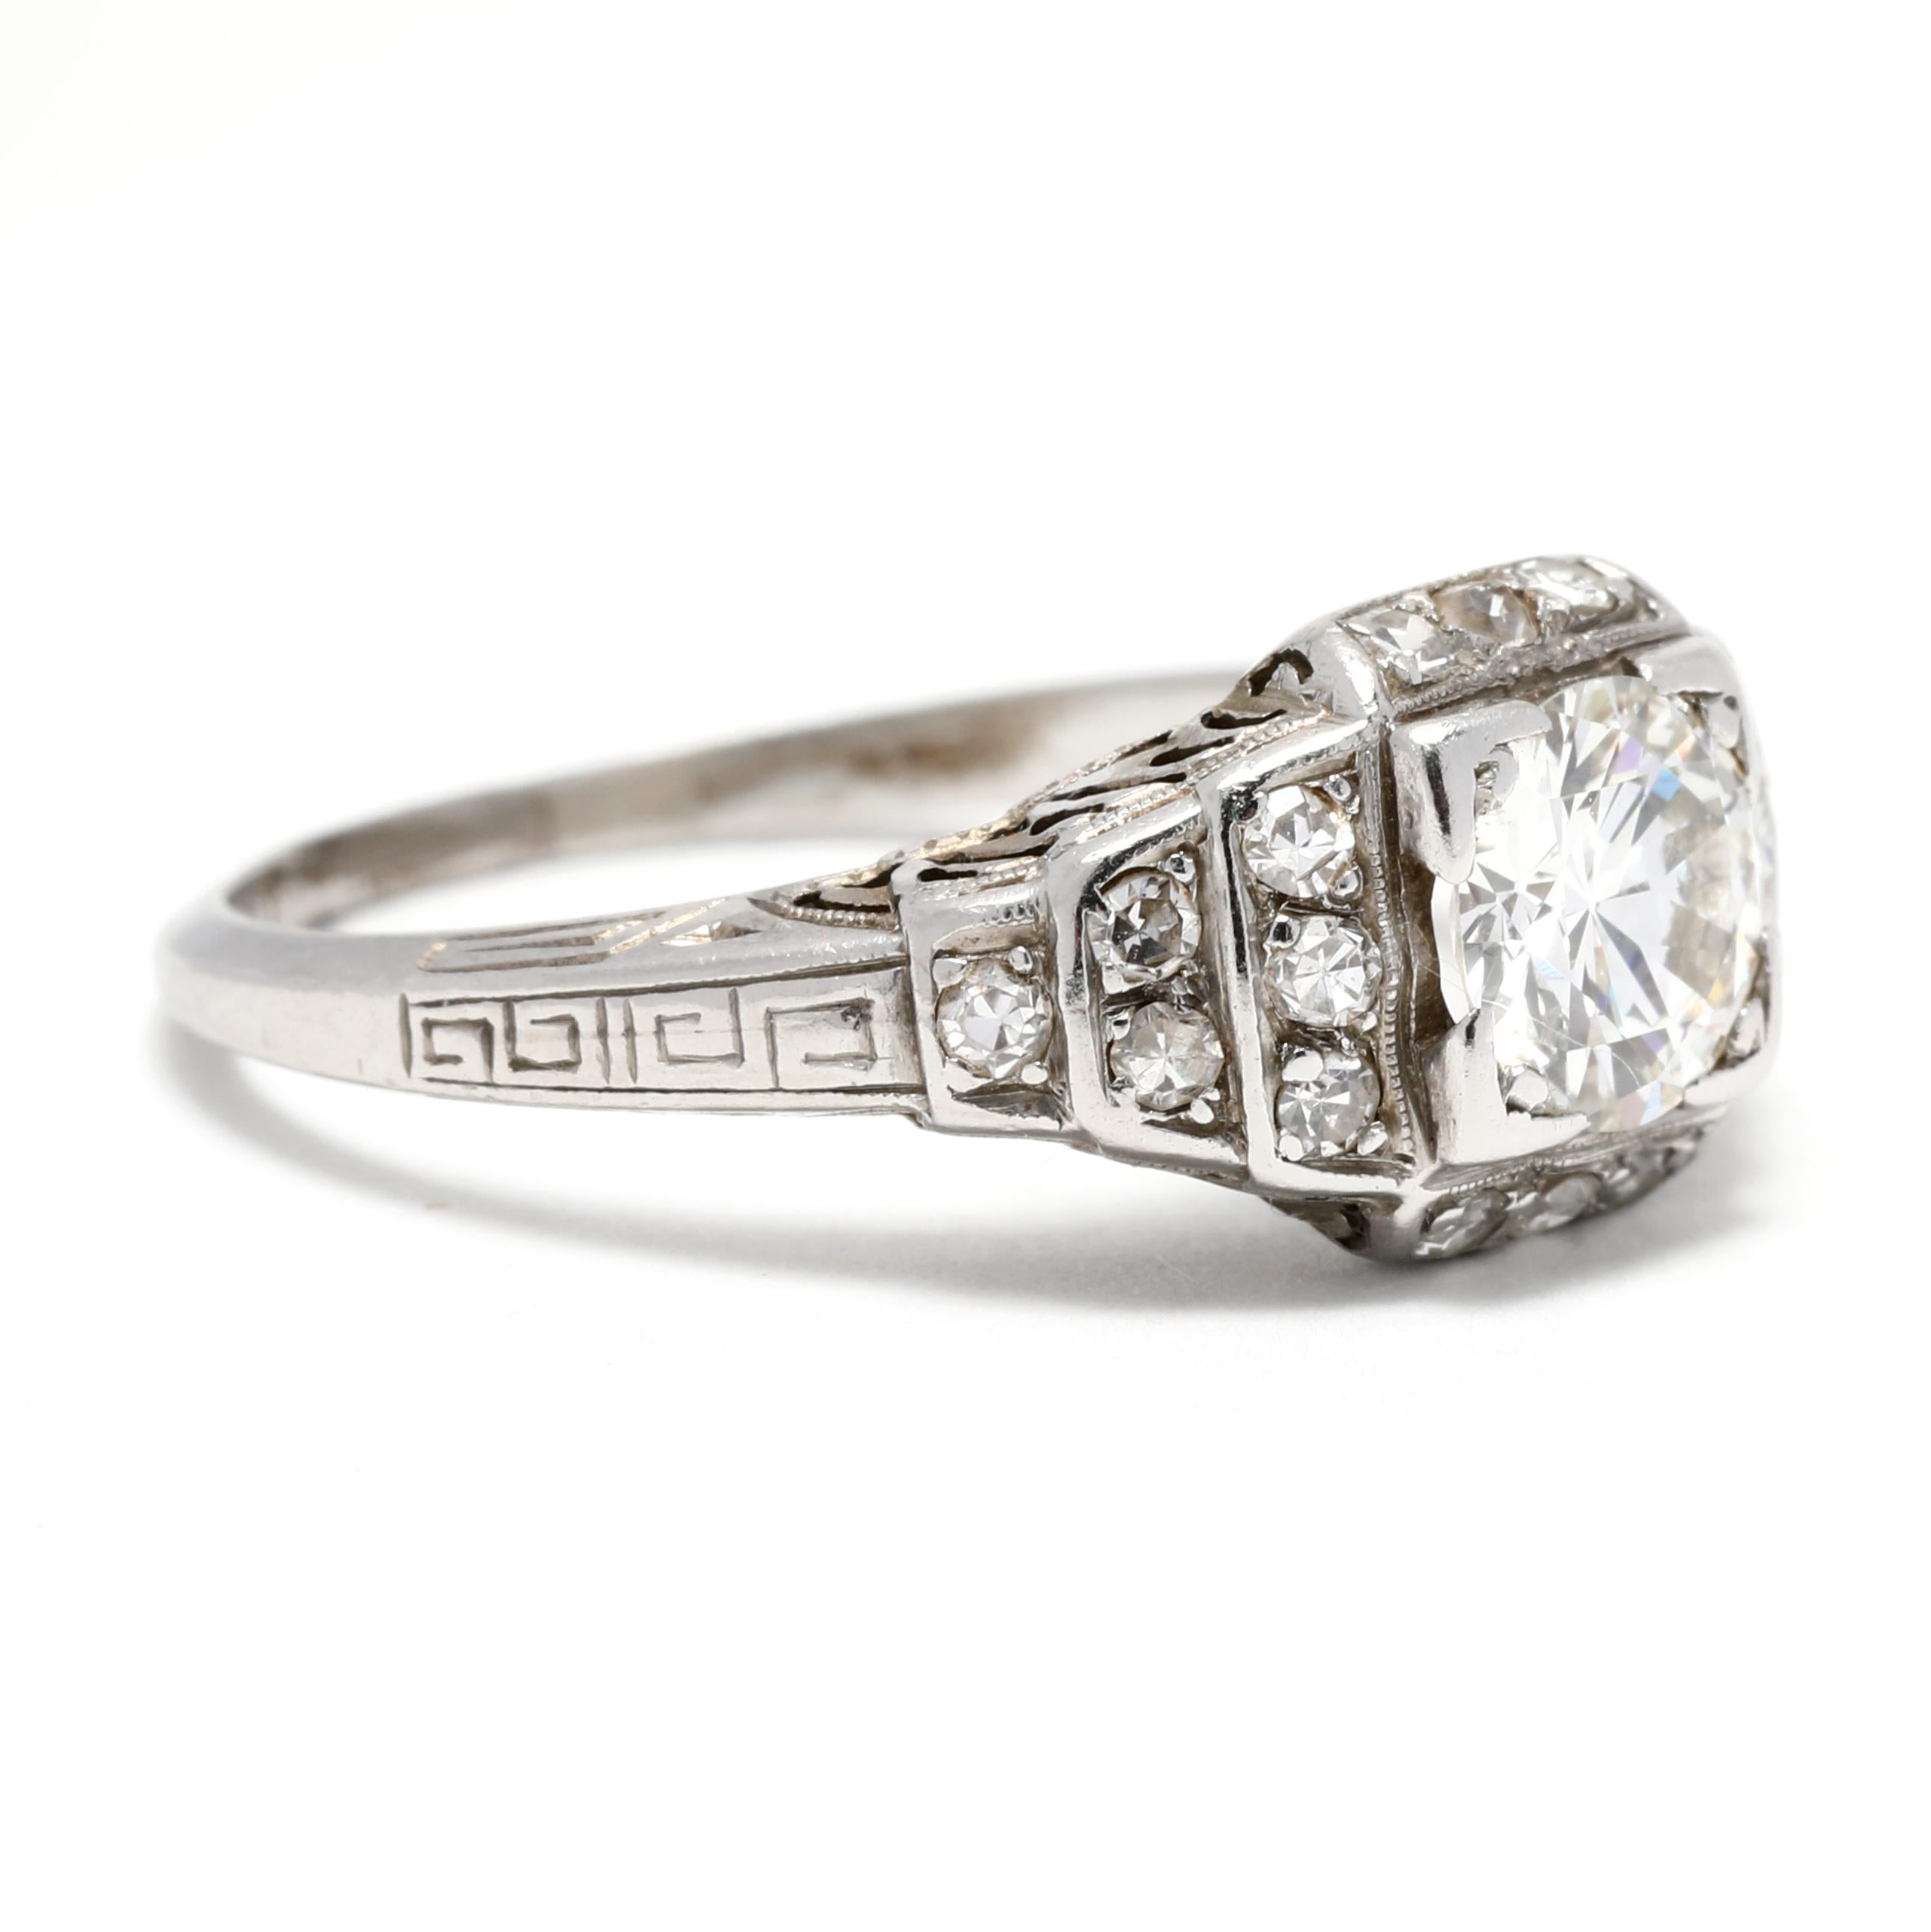 This stunning Art Deco 0.88ctw Old European Cut Diamond Engagement Ring is crafted in Platinum and is a size 6.25. This one-of-a-kind antique engagement ring features a beautiful Old European Cut diamond set in a classic four-prong setting. The